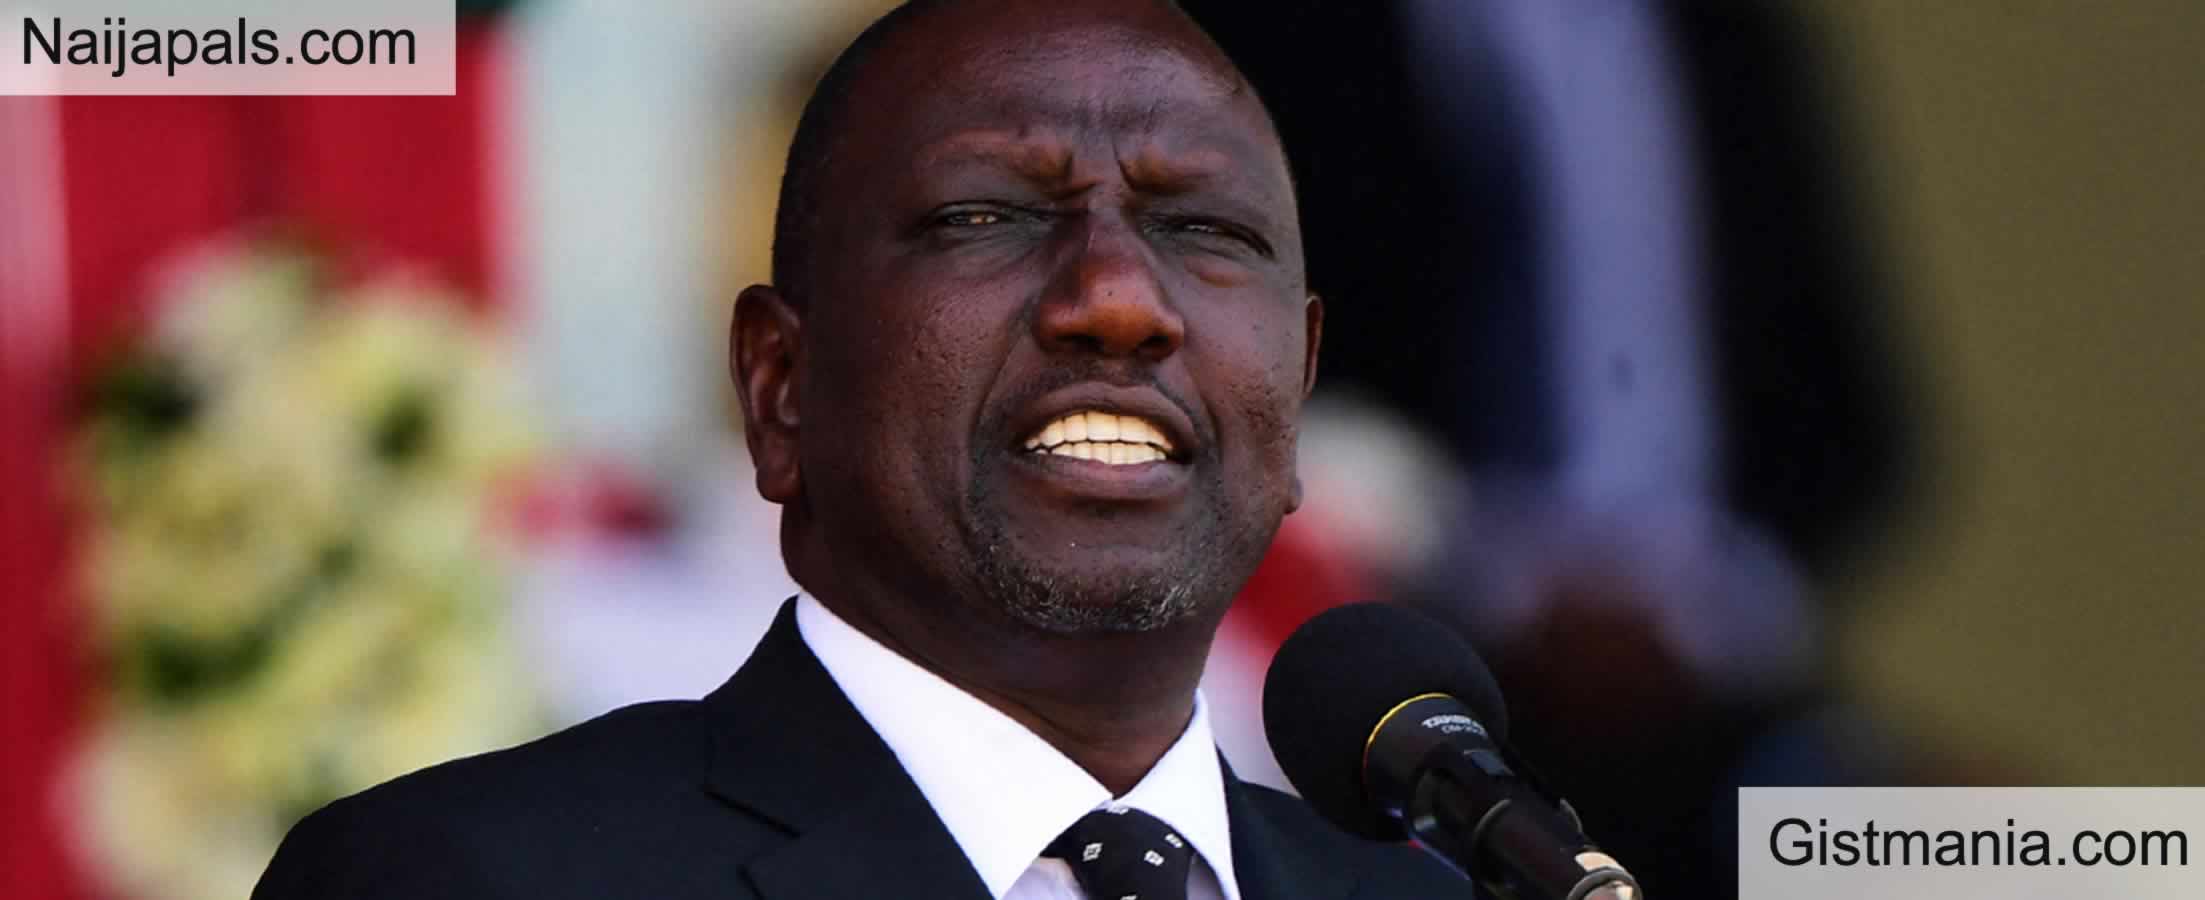 Kenya’s President William Ruto Withdraws Finance Bill After Deadly Protest Which Killed 22 People